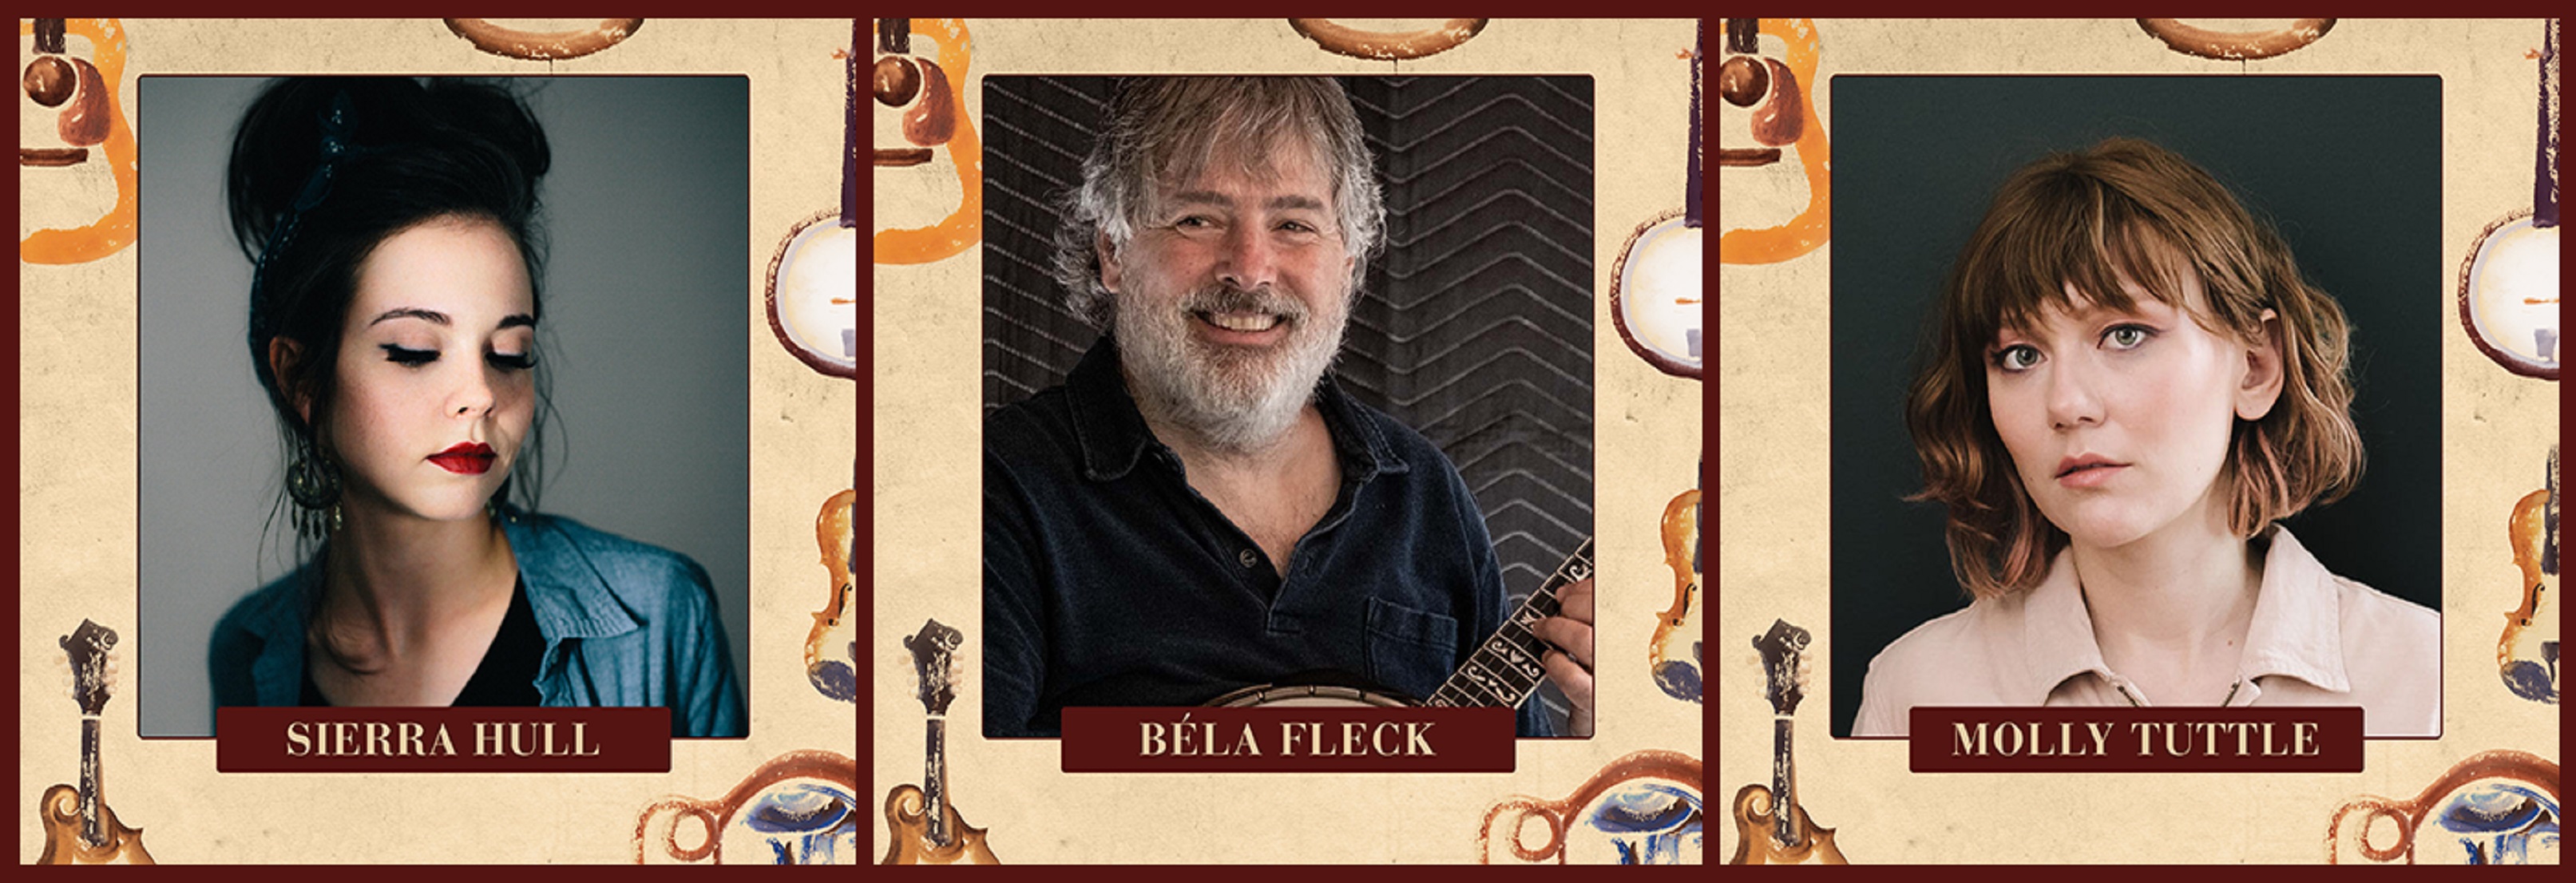 Béla Fleck's 'Wheels Up' featuring Sierra Hull & Molly Tuttle